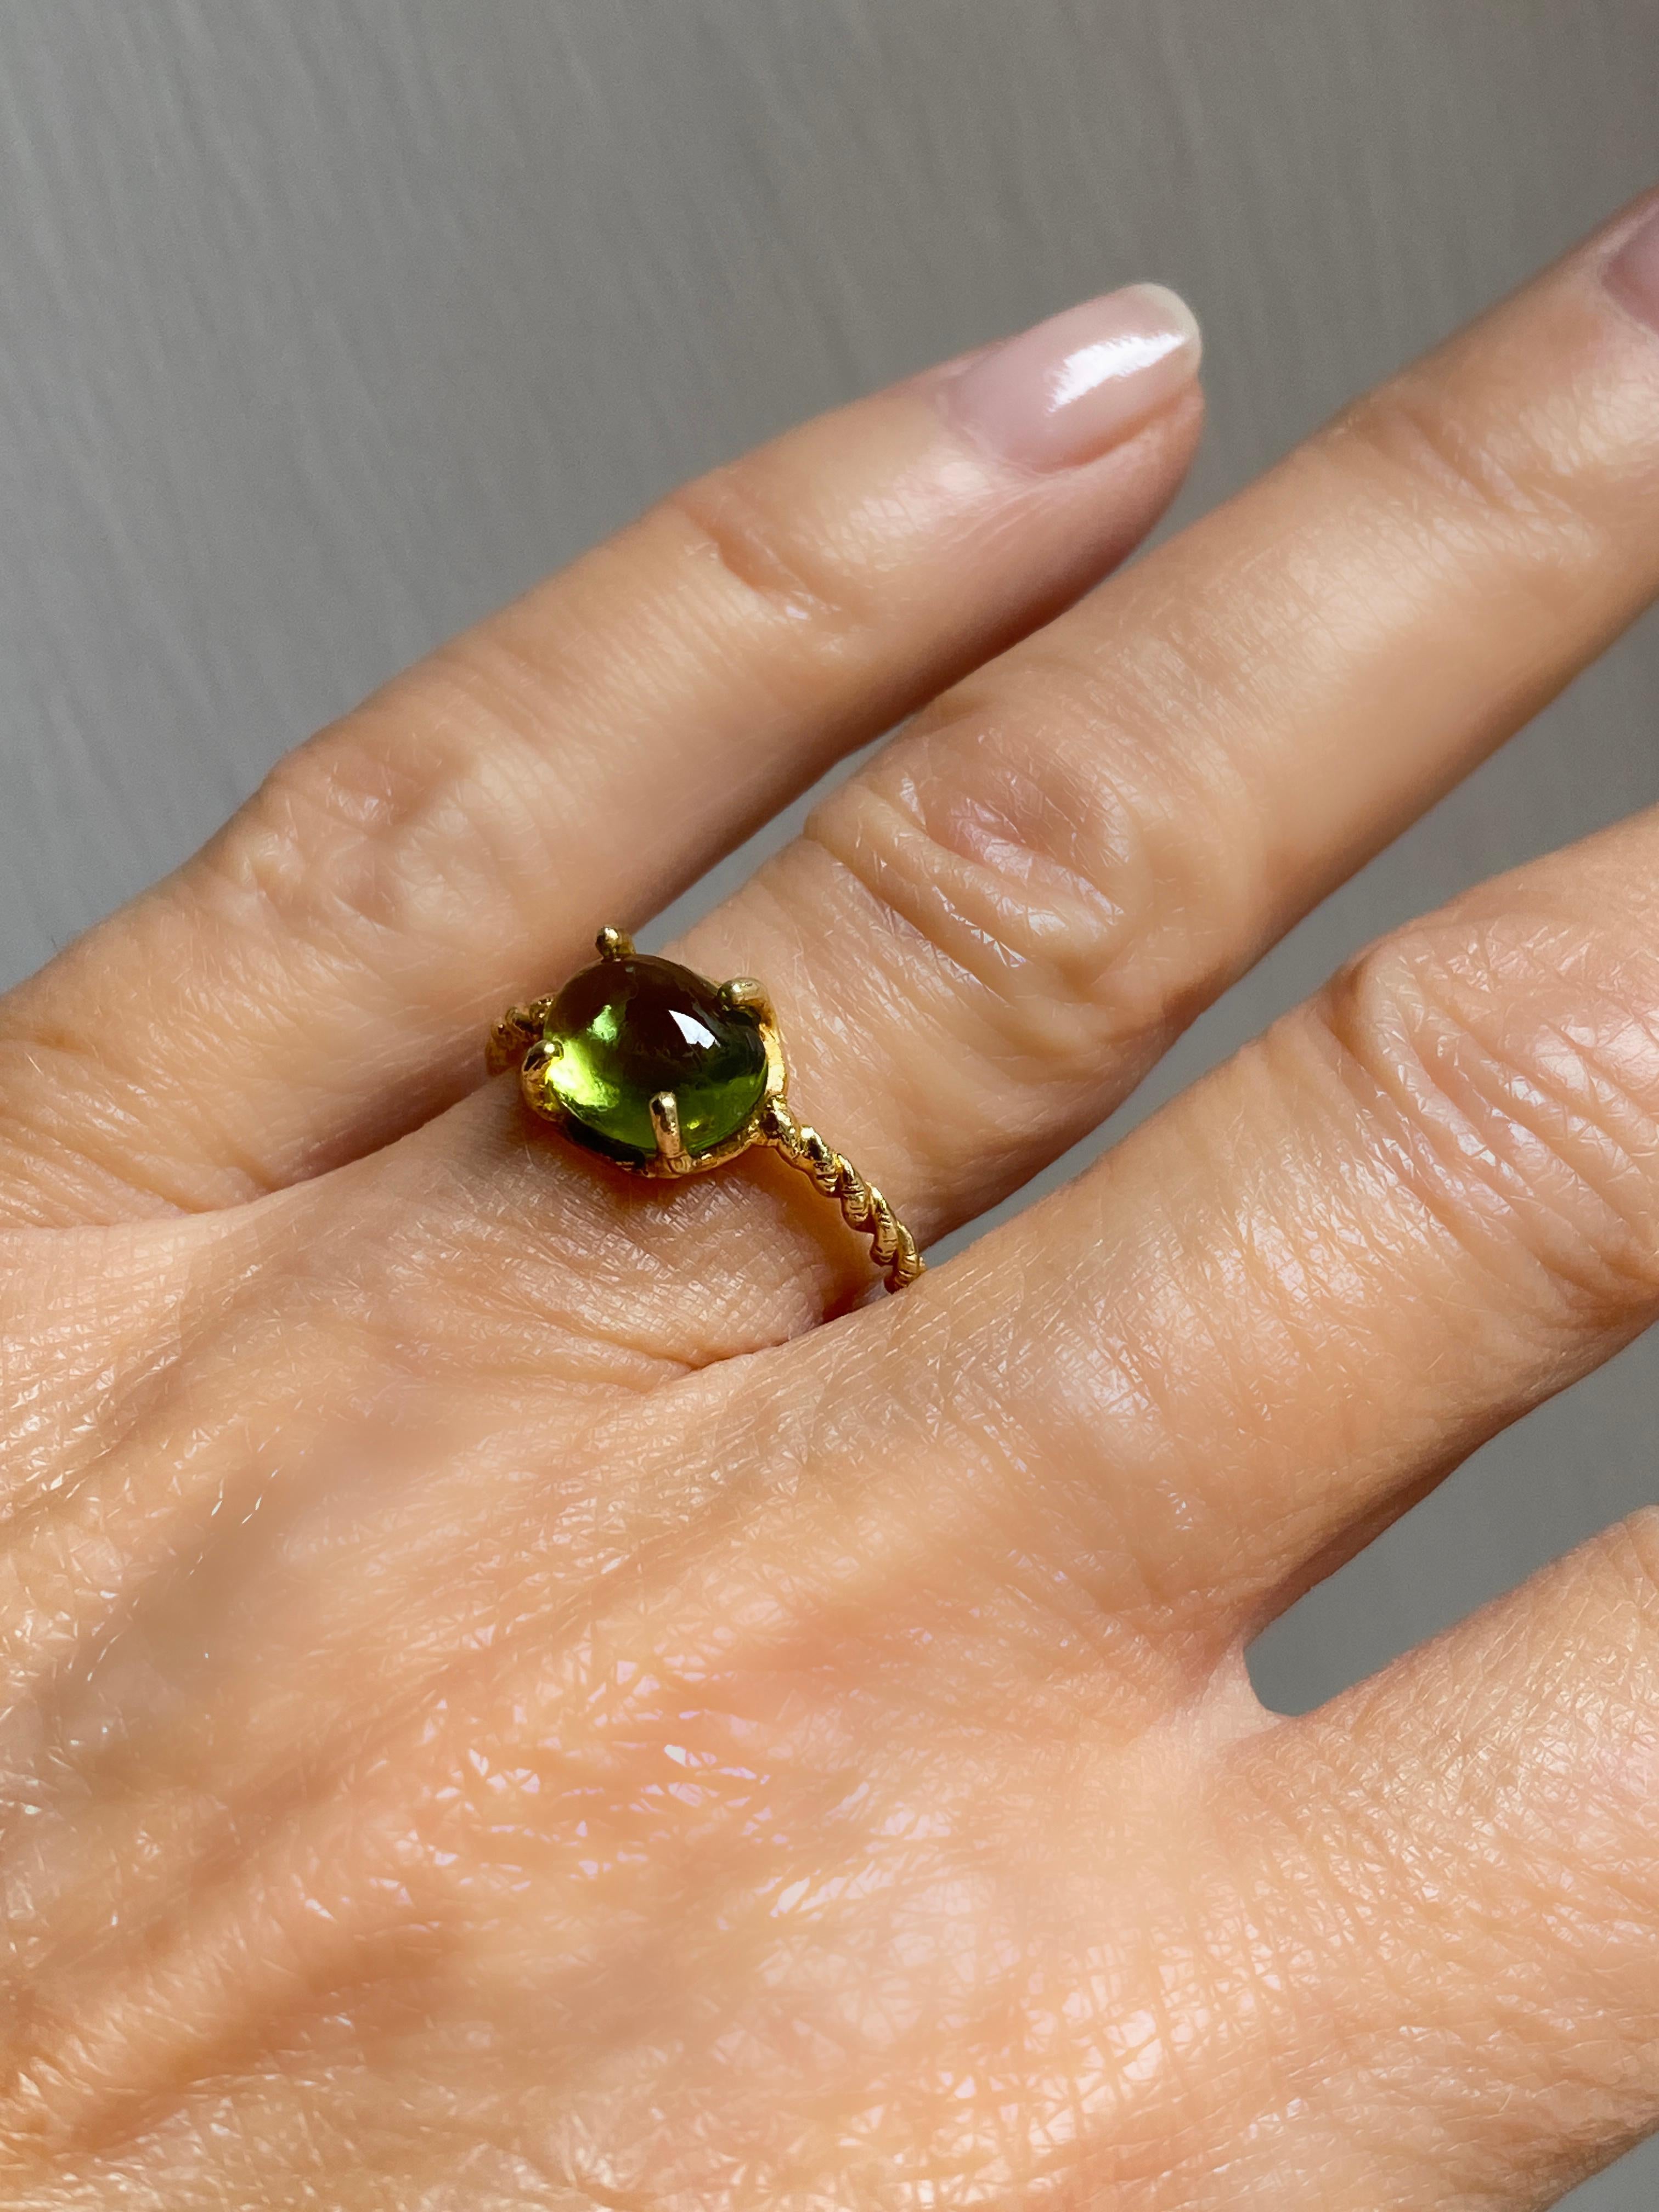 Introducing Rossella Ugolini's 18K Yellow Gold Delicate and Unique Ring, an exquisite blend of artistry and Nature designed to captivate green and nature enthusiasts.
This ring draws inspiration from Nature, featuring a handmade frame that mimics